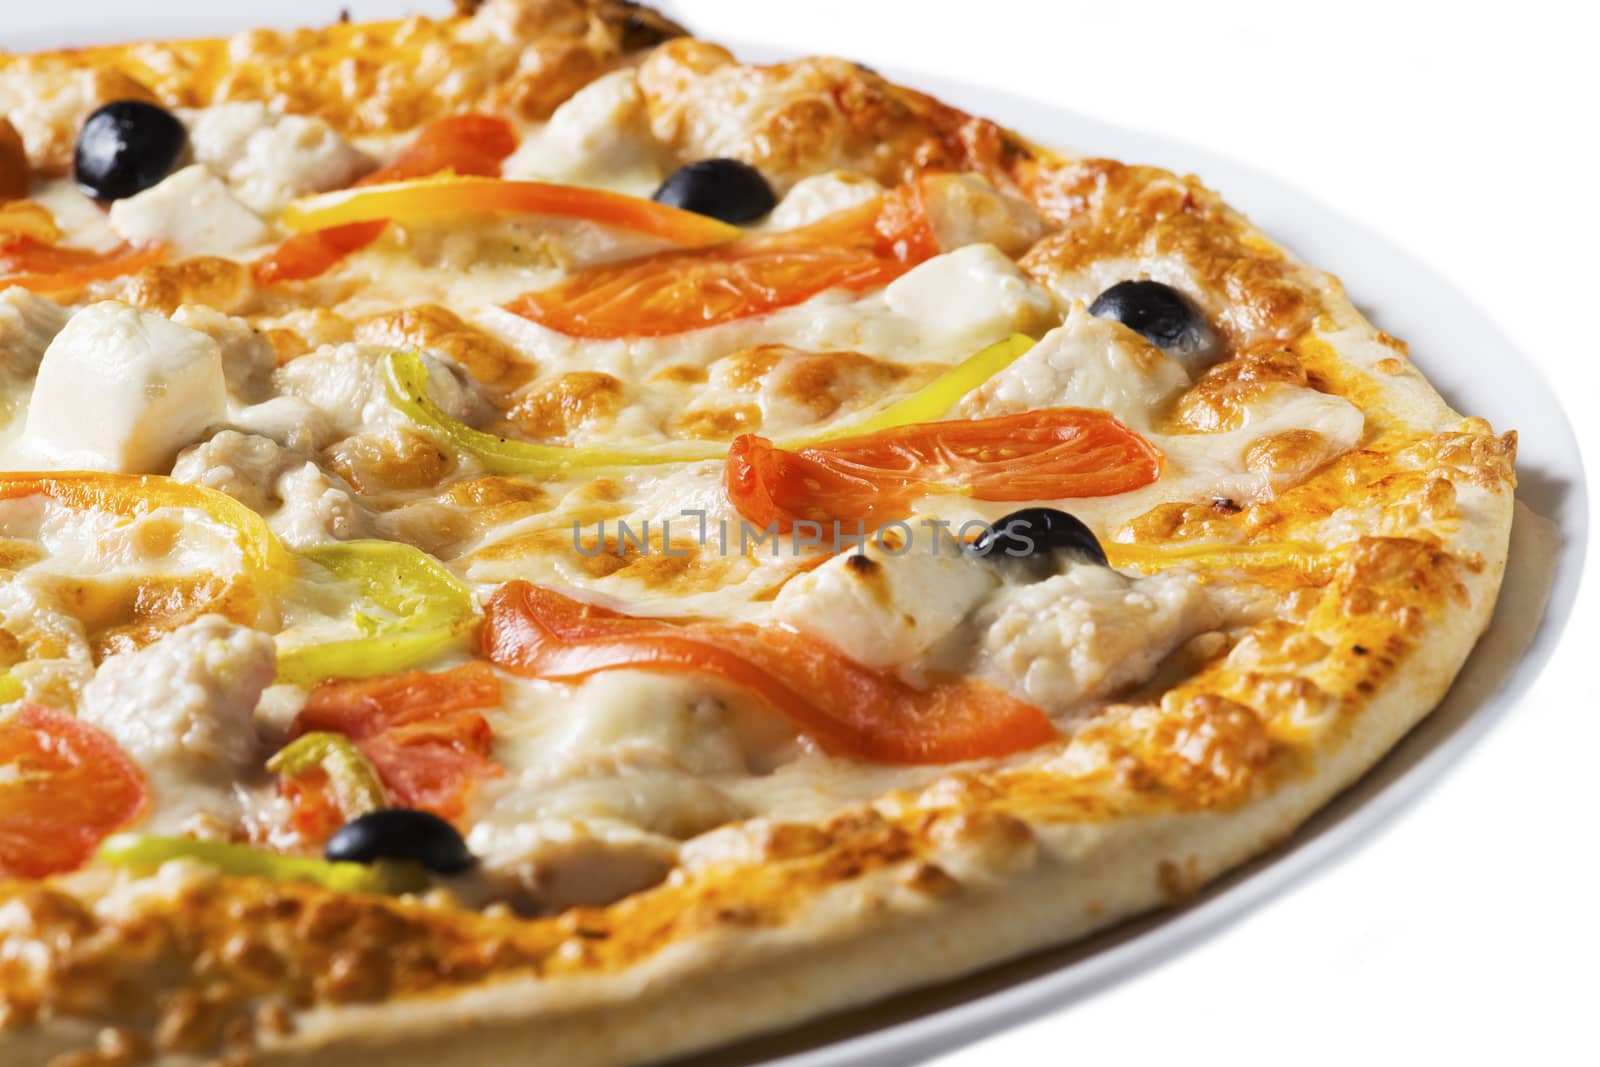 Tasty pizza with vegetables and cheese by kzen